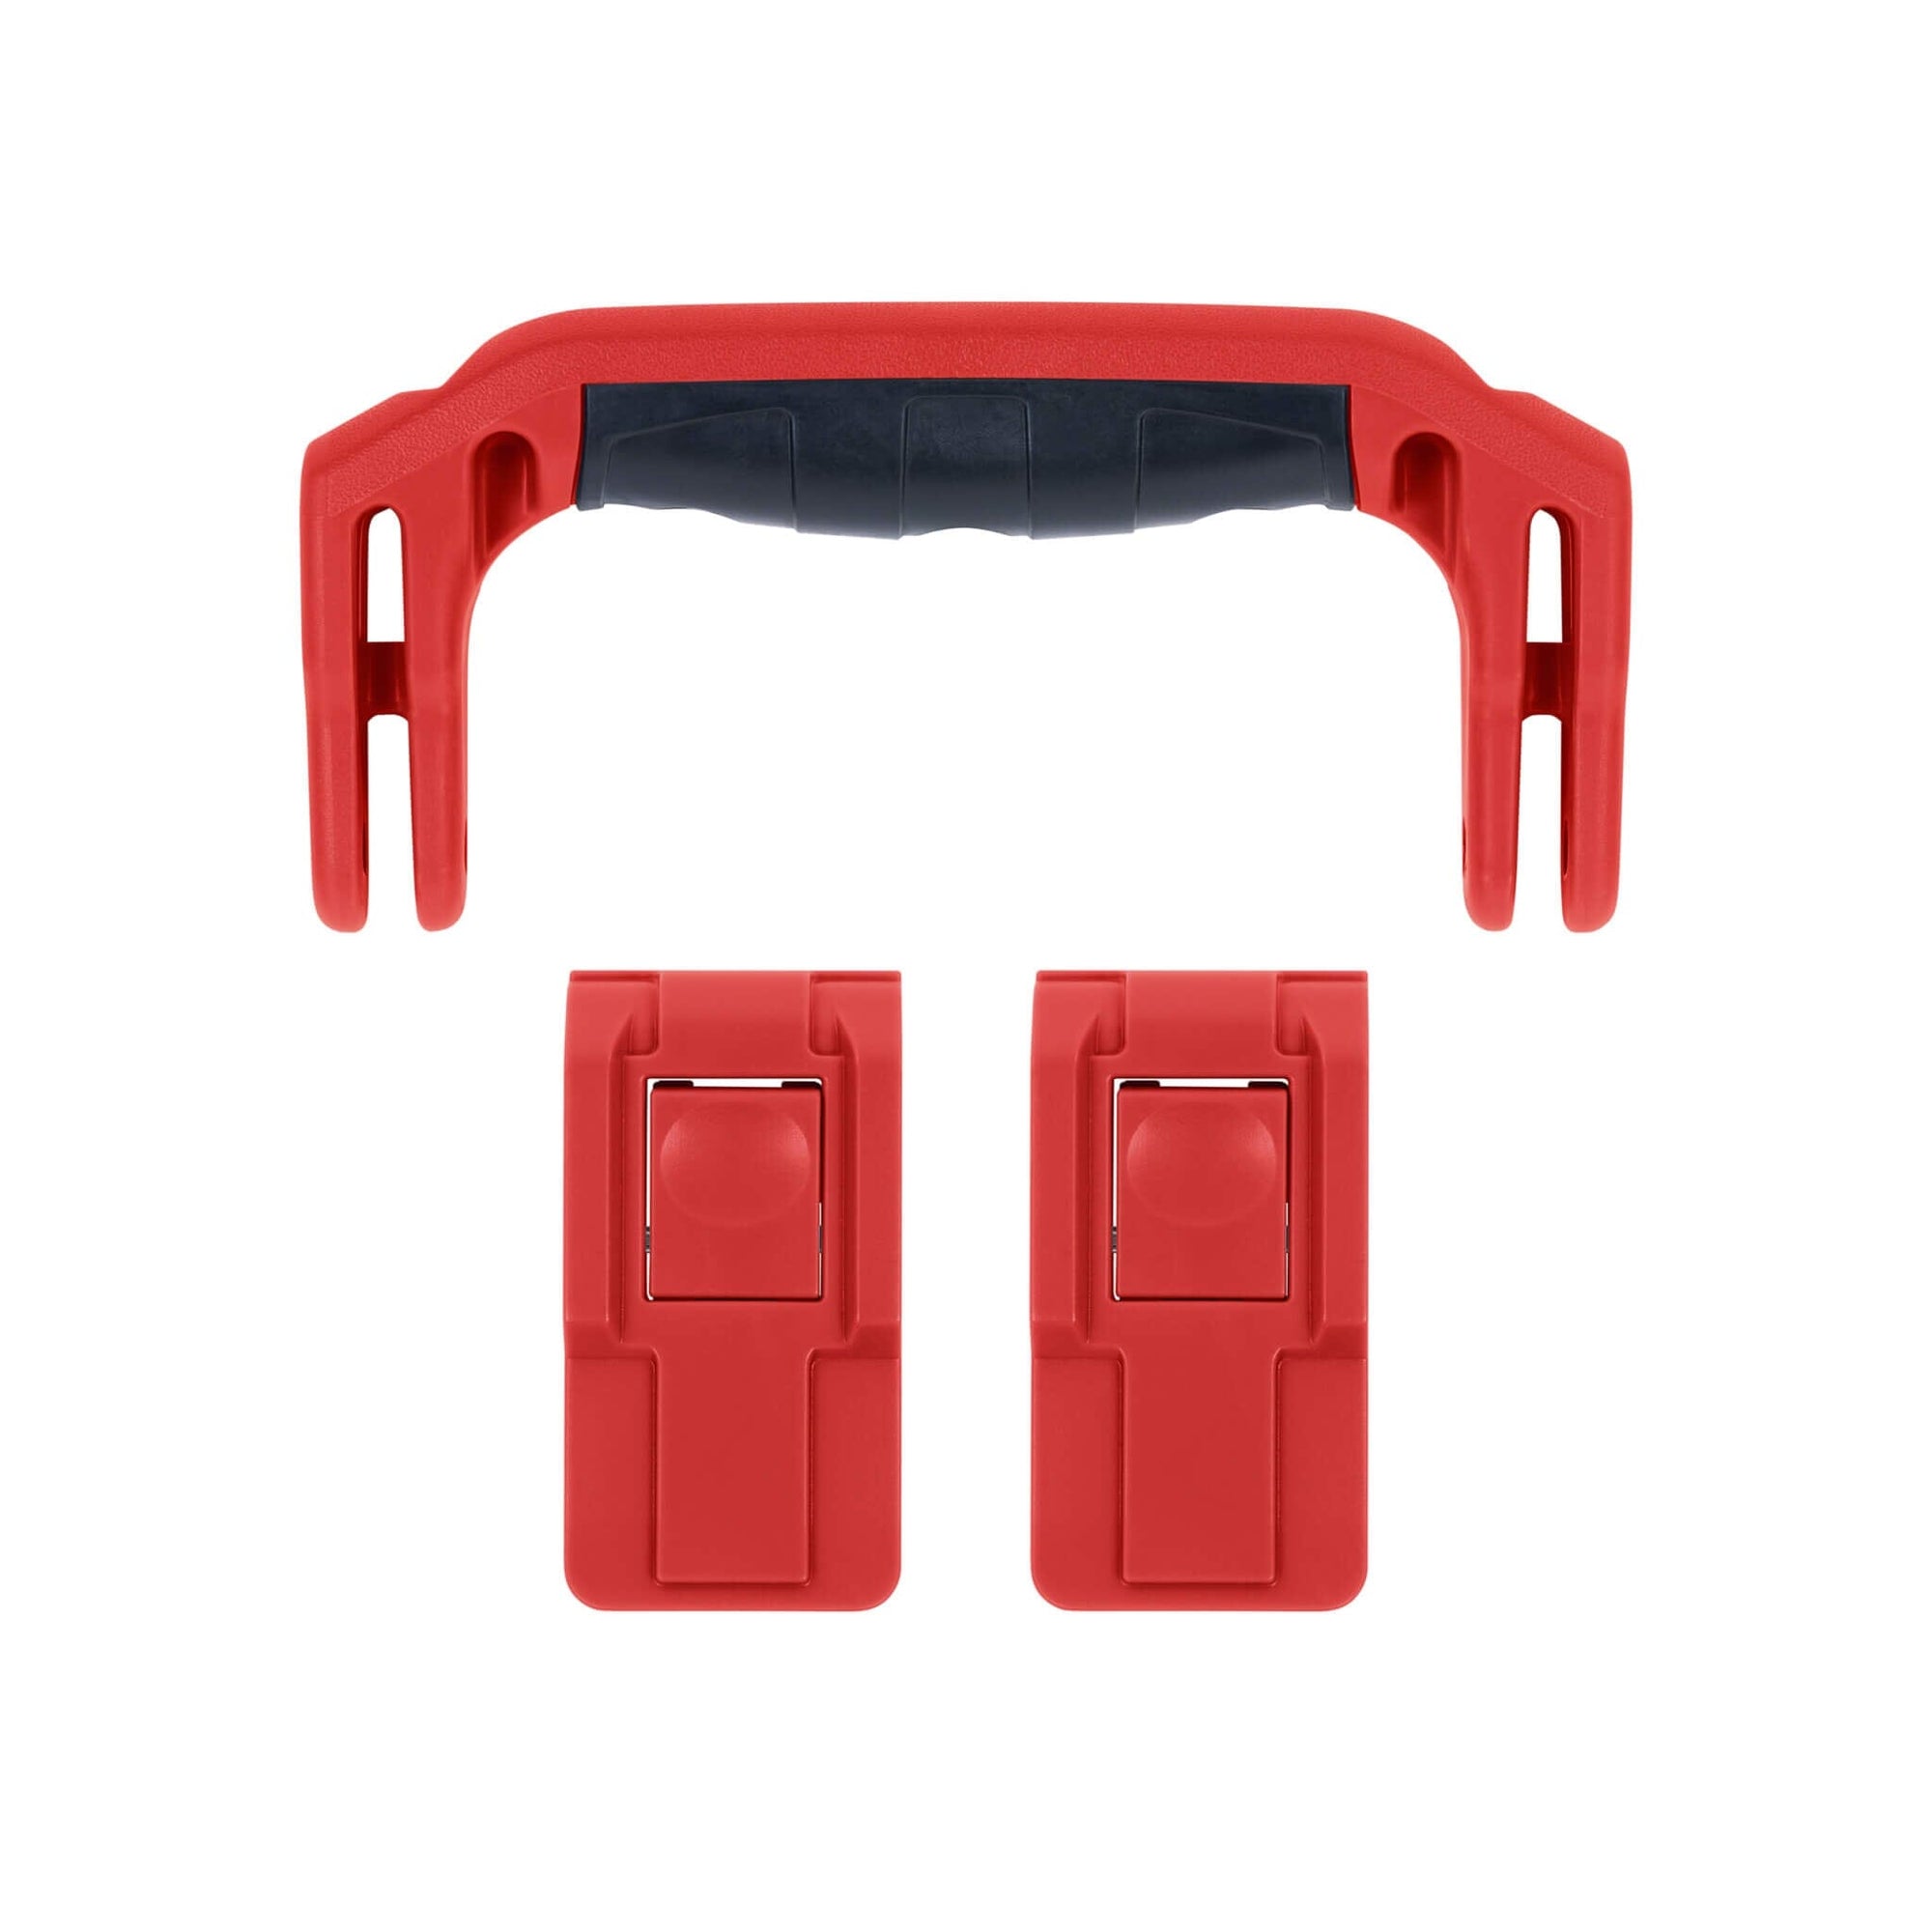 Pelican 1506 Air Replacement Handle & Latches, Red (Set of 1 Handle, 2 Latches) ColorCase 